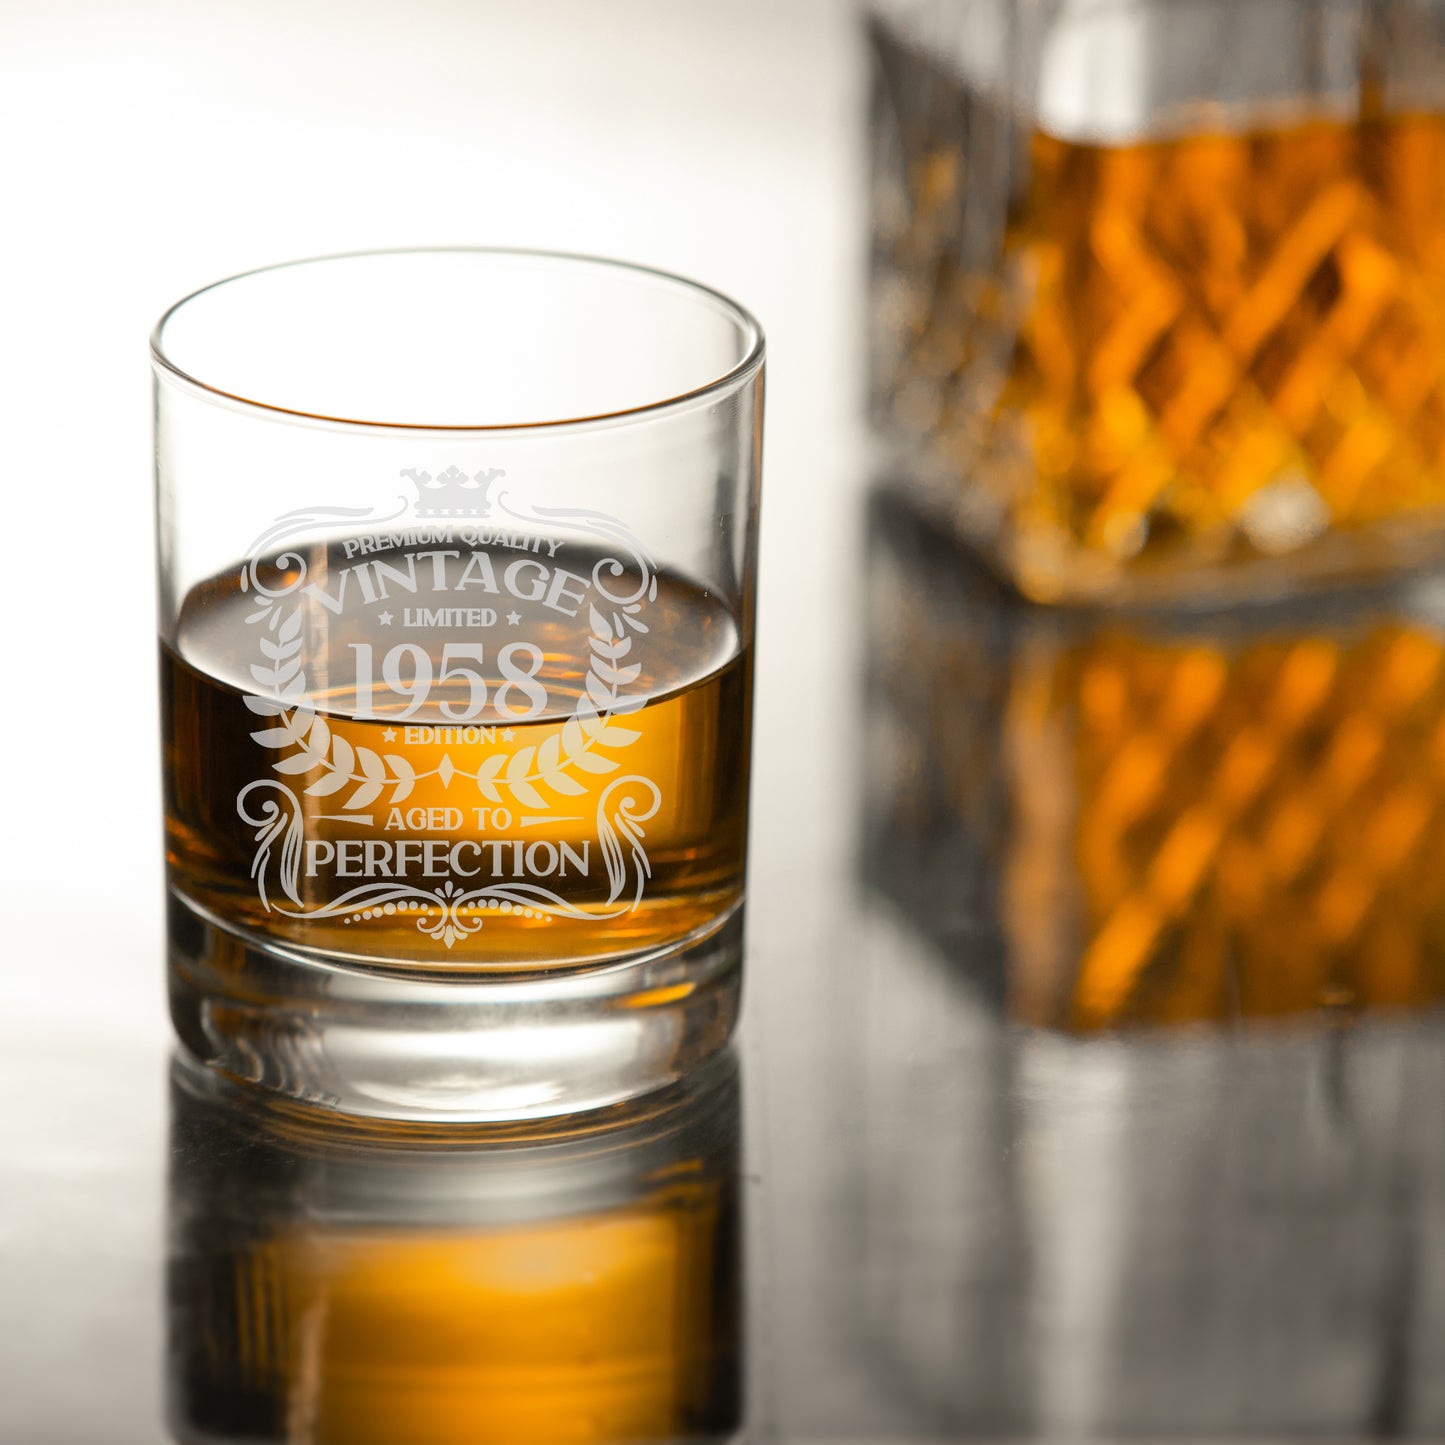 Vintage 1958 65th Birthday Engraved Whiskey Glass Gift  - Always Looking Good -   